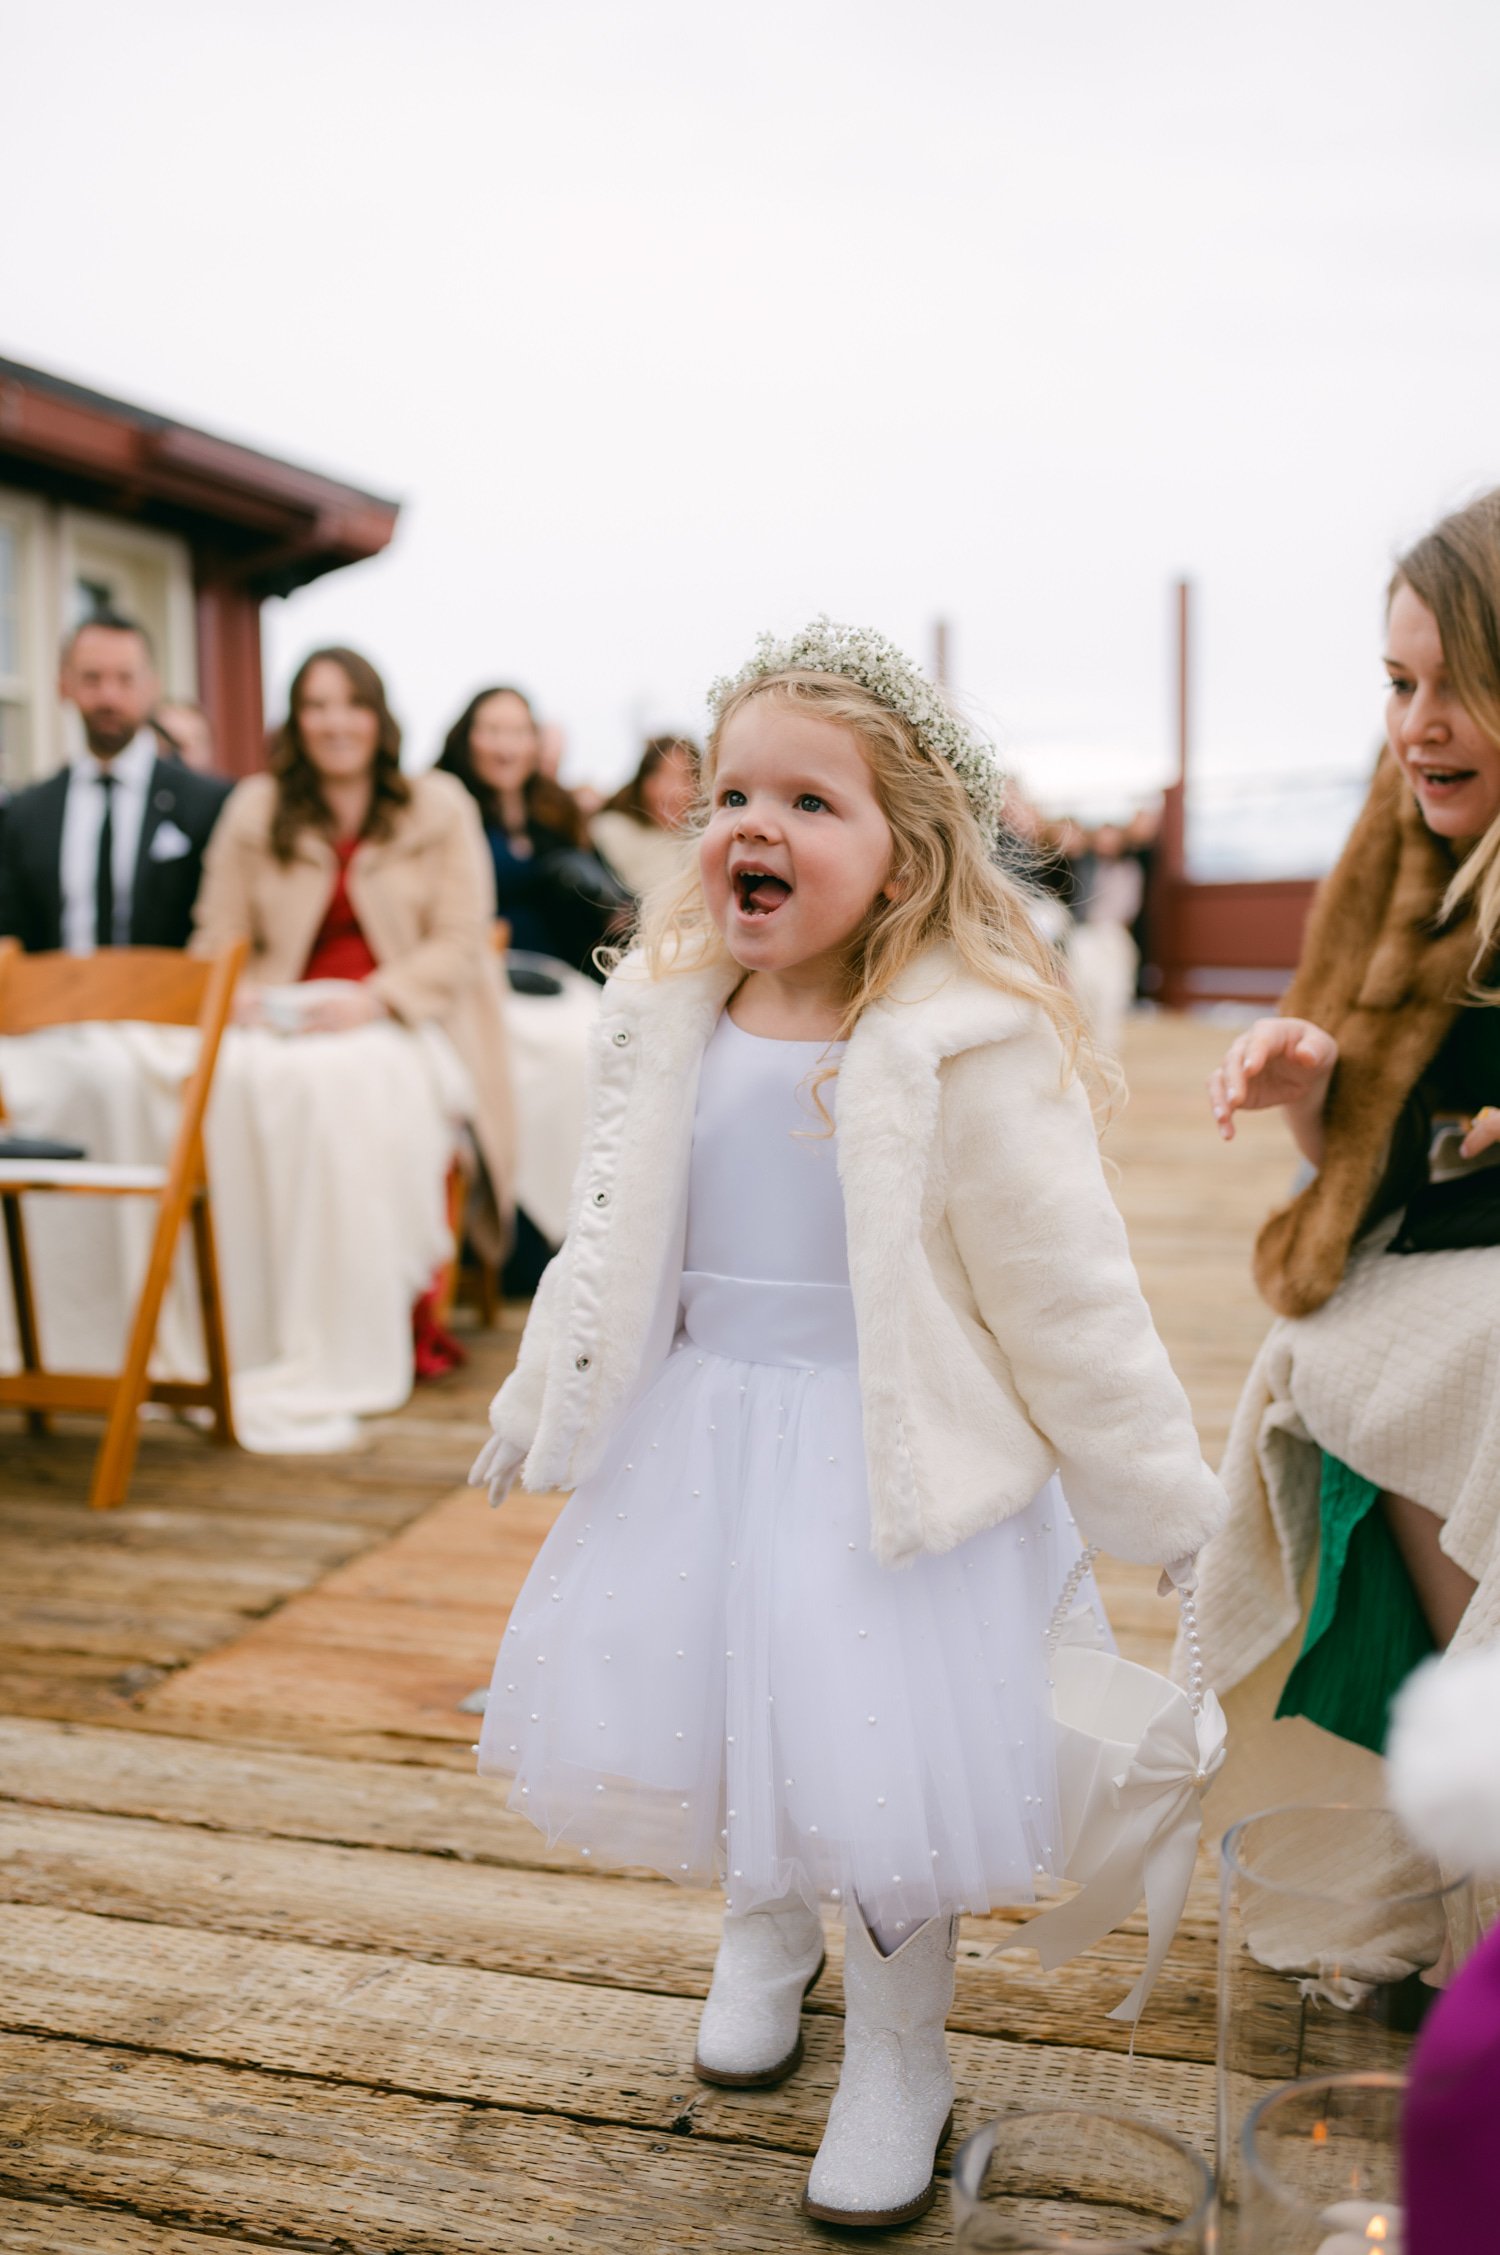 Sun Valley Roundhouse Wedding photos of the flower girl wearing a flower crown walking down the aisle